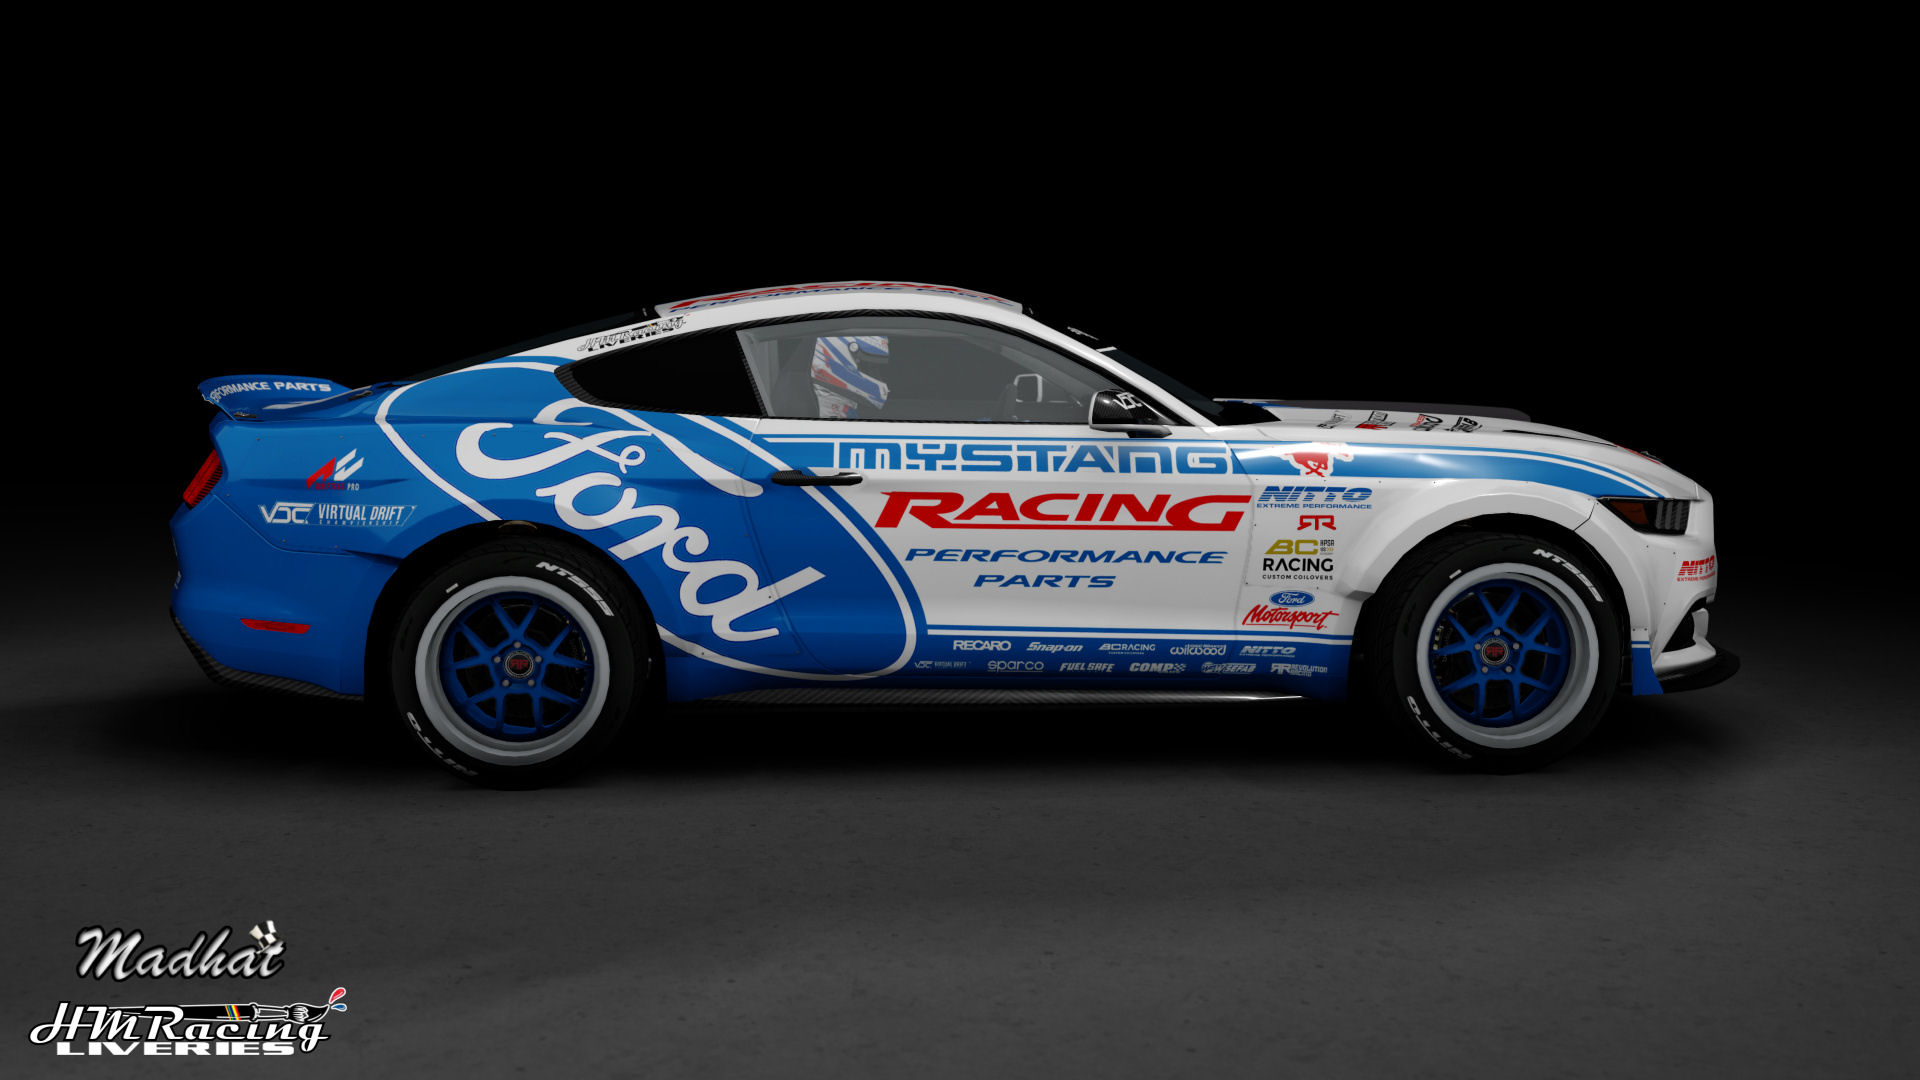 Ford Racing Performance Parts VDC RTR Mustang Madhat HMRacing Liveries 03.jpg